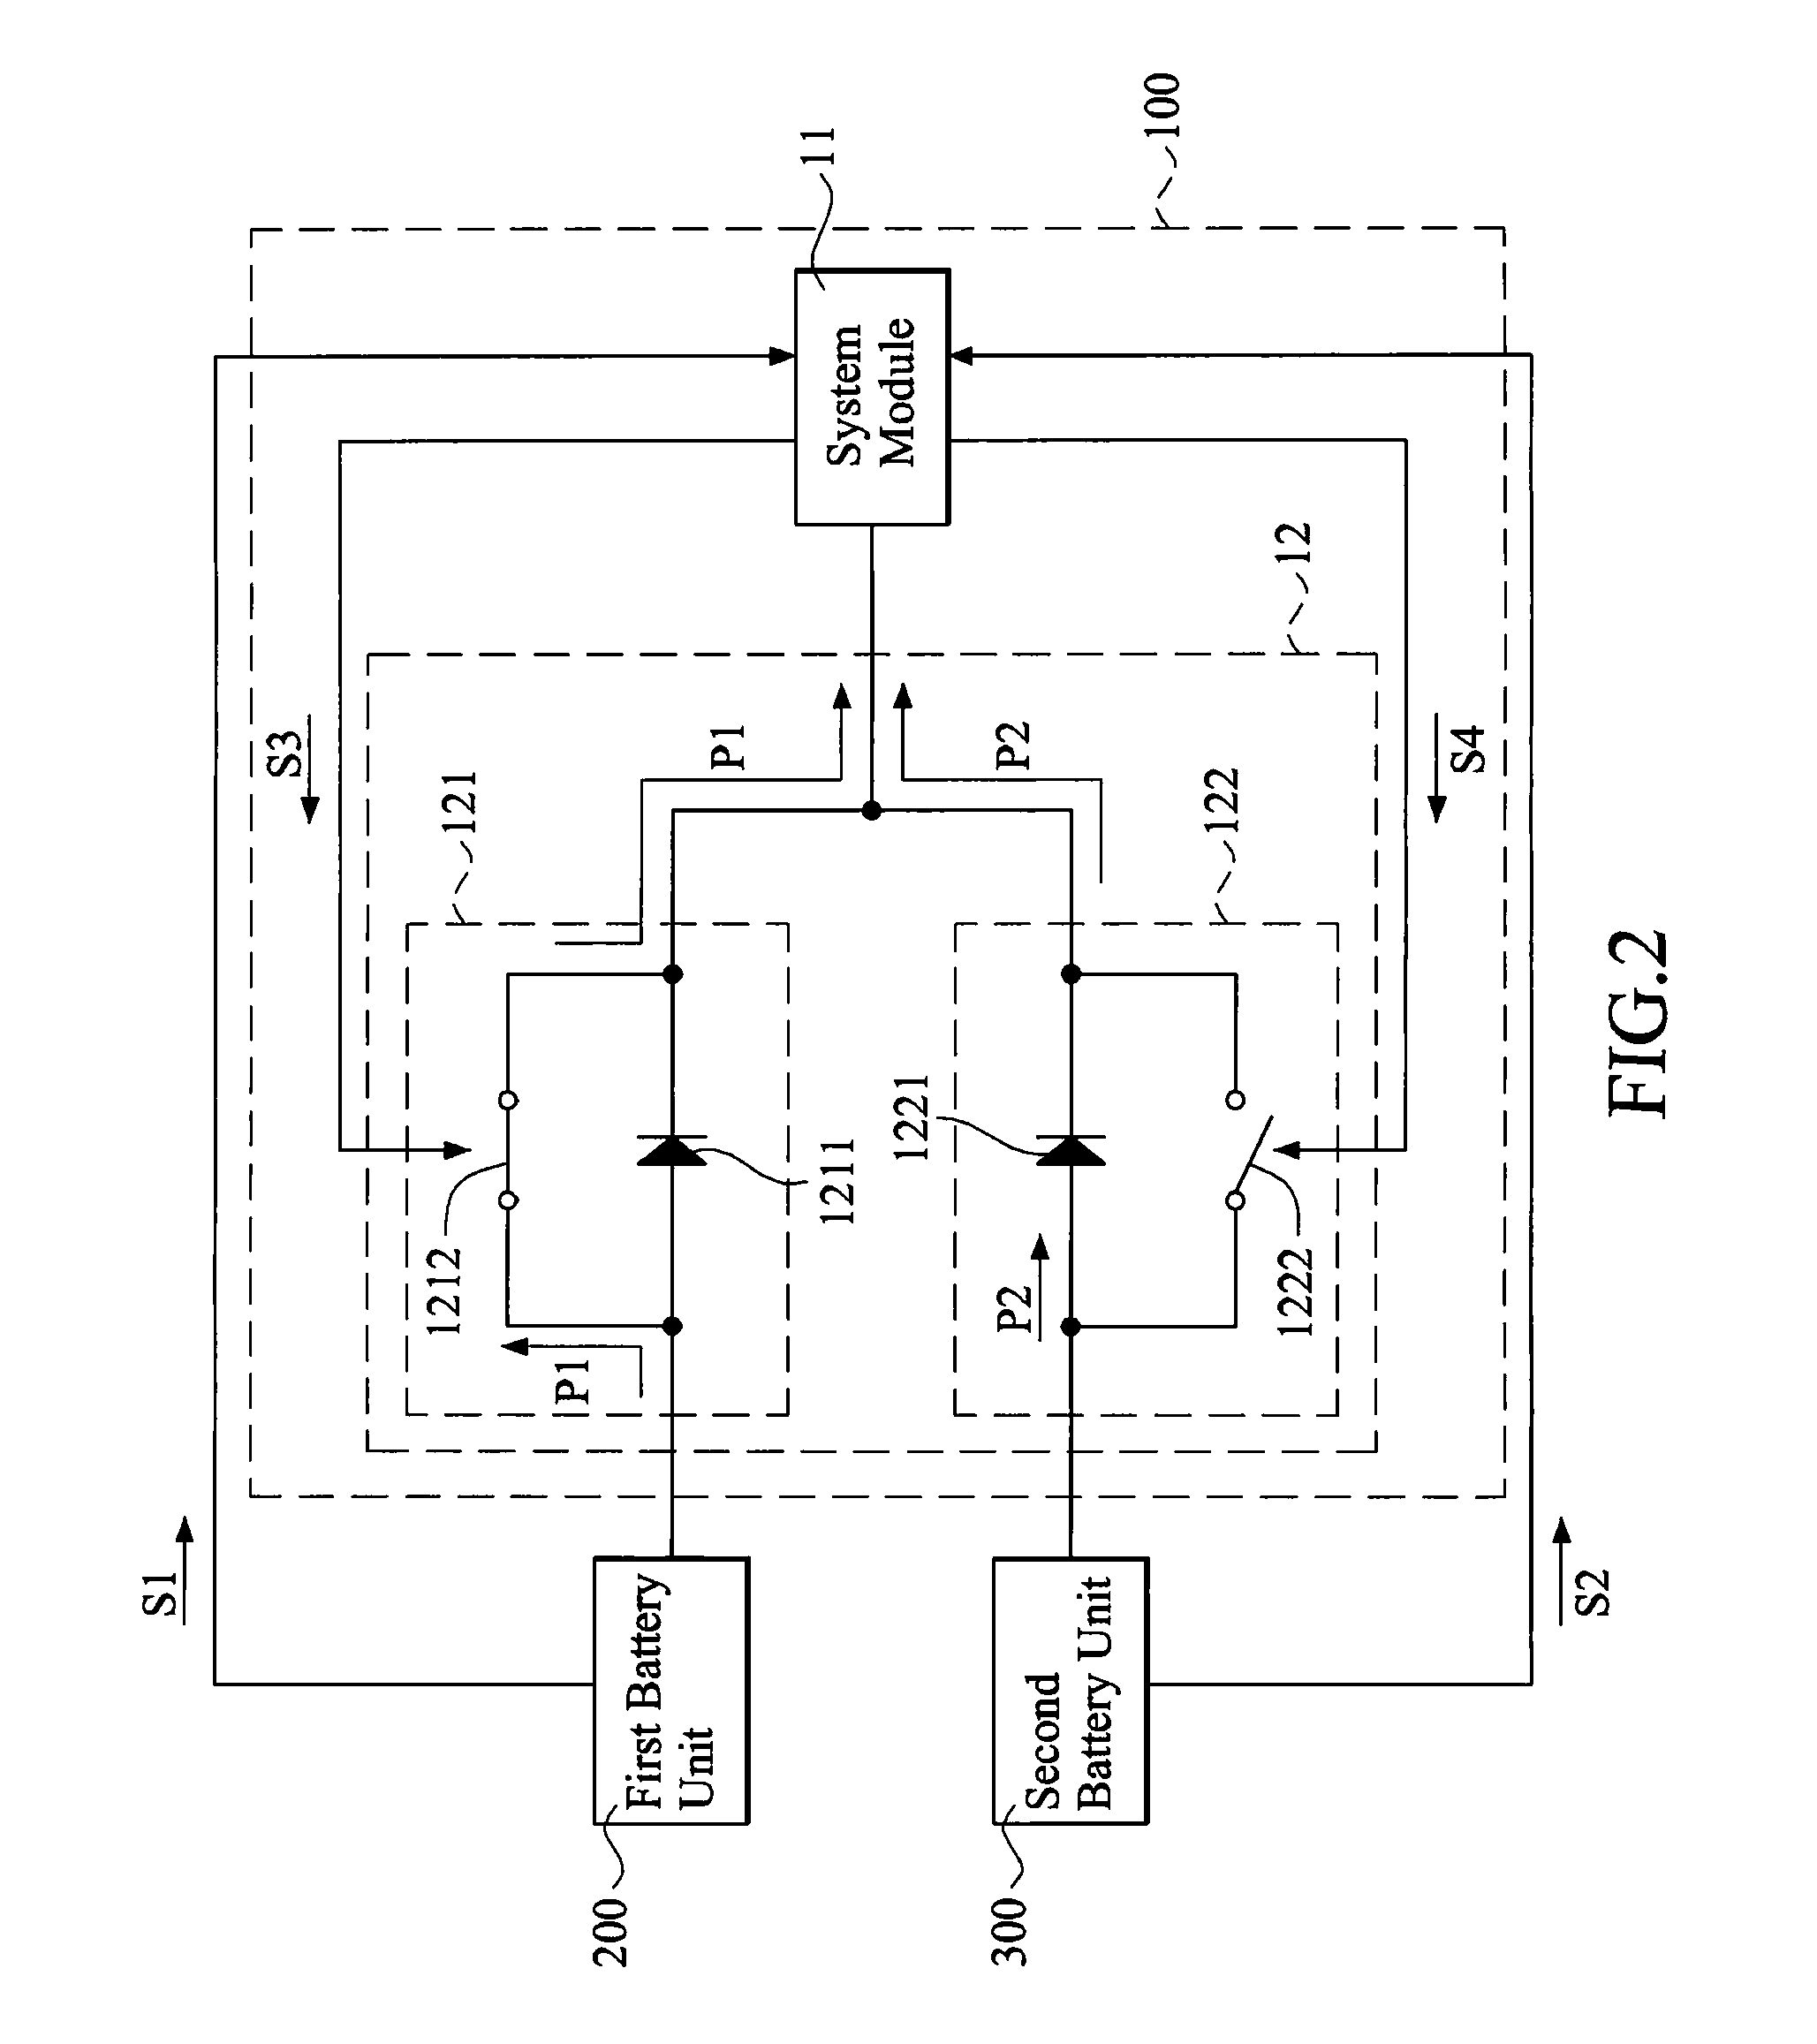 Electronic assembly provided with a parallel circuit for connecting electrically to two battery units